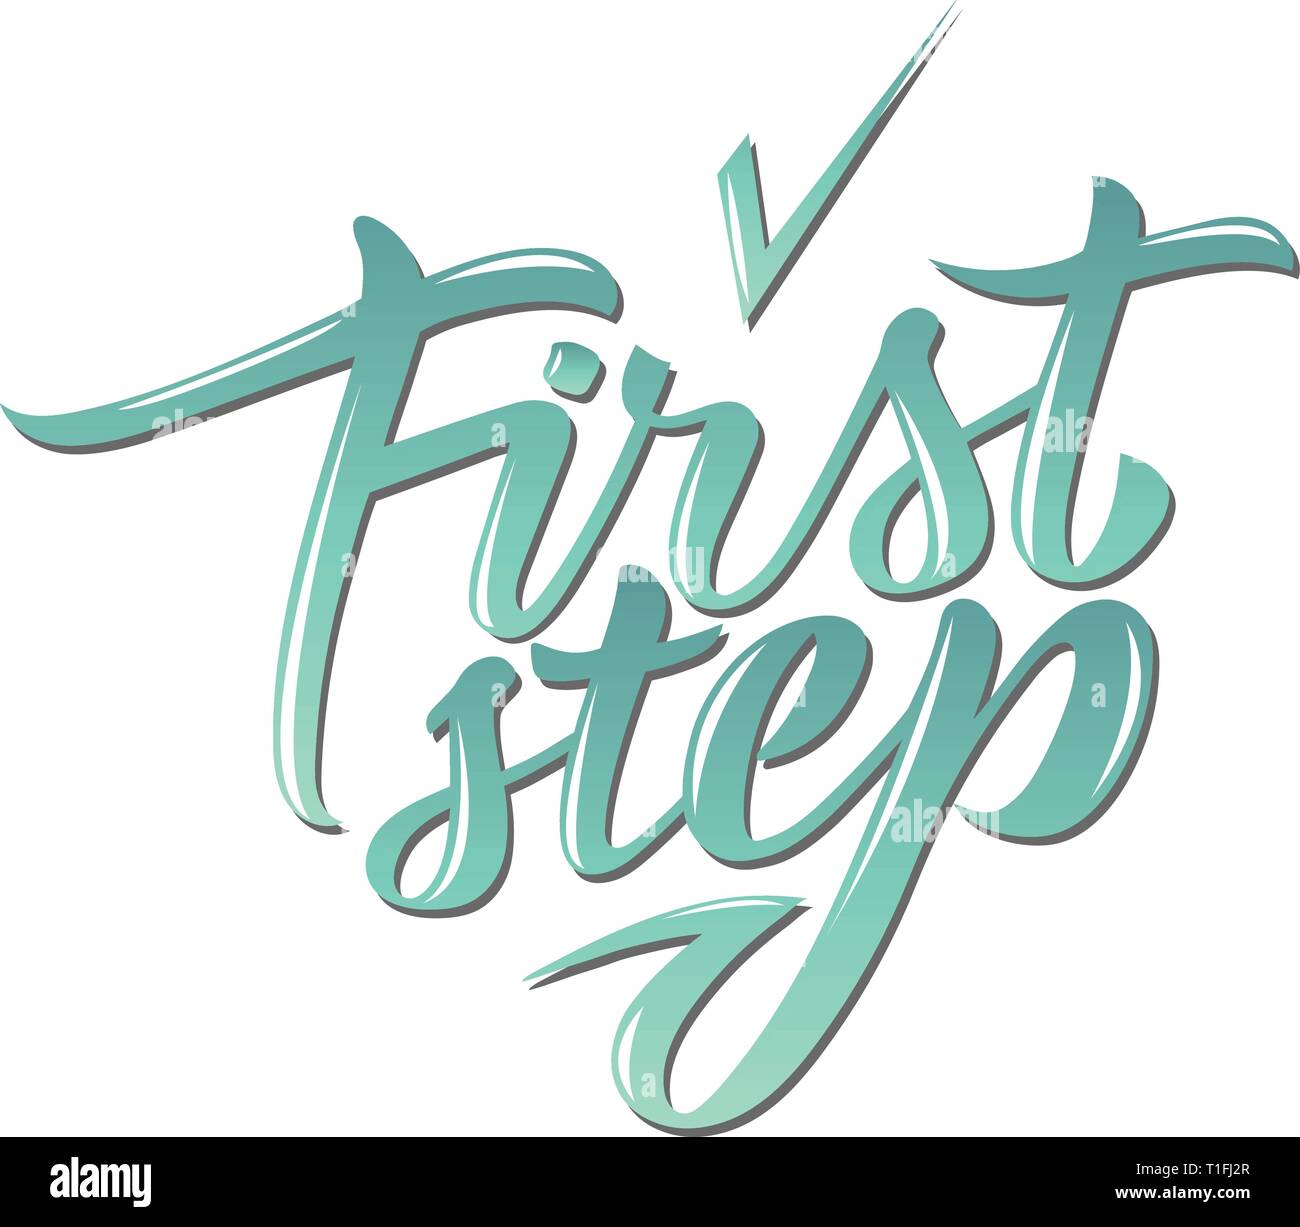 First step. Vector illustration with handwritten phrase. Lettering Stock Vector